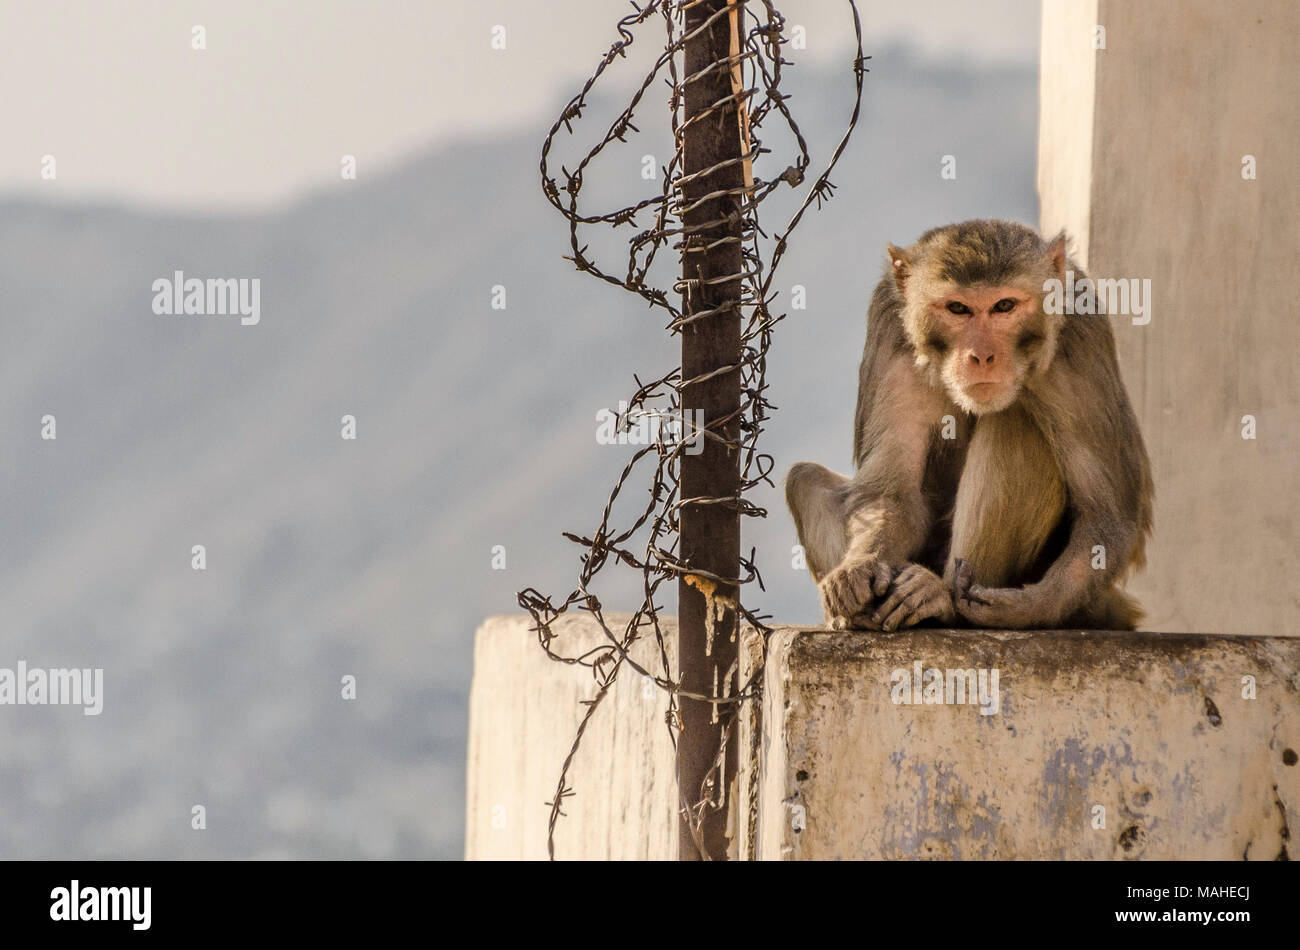 Scary Monkey looking directly into camera in Jaipur. Galtaji monkey temple with barbed wire next to dangerous / evil looking monkey Stock Photo